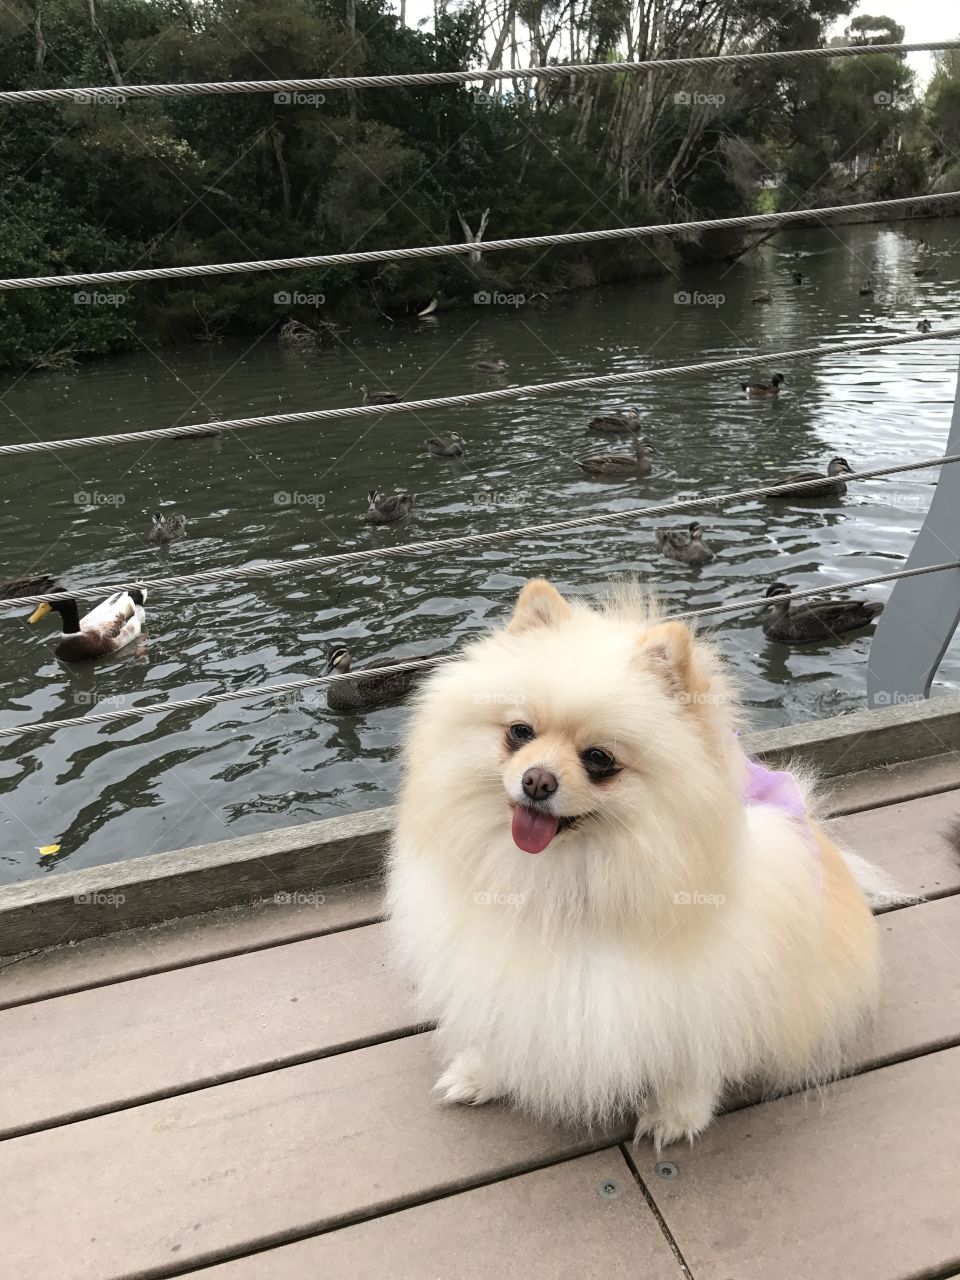 At the Duck Park